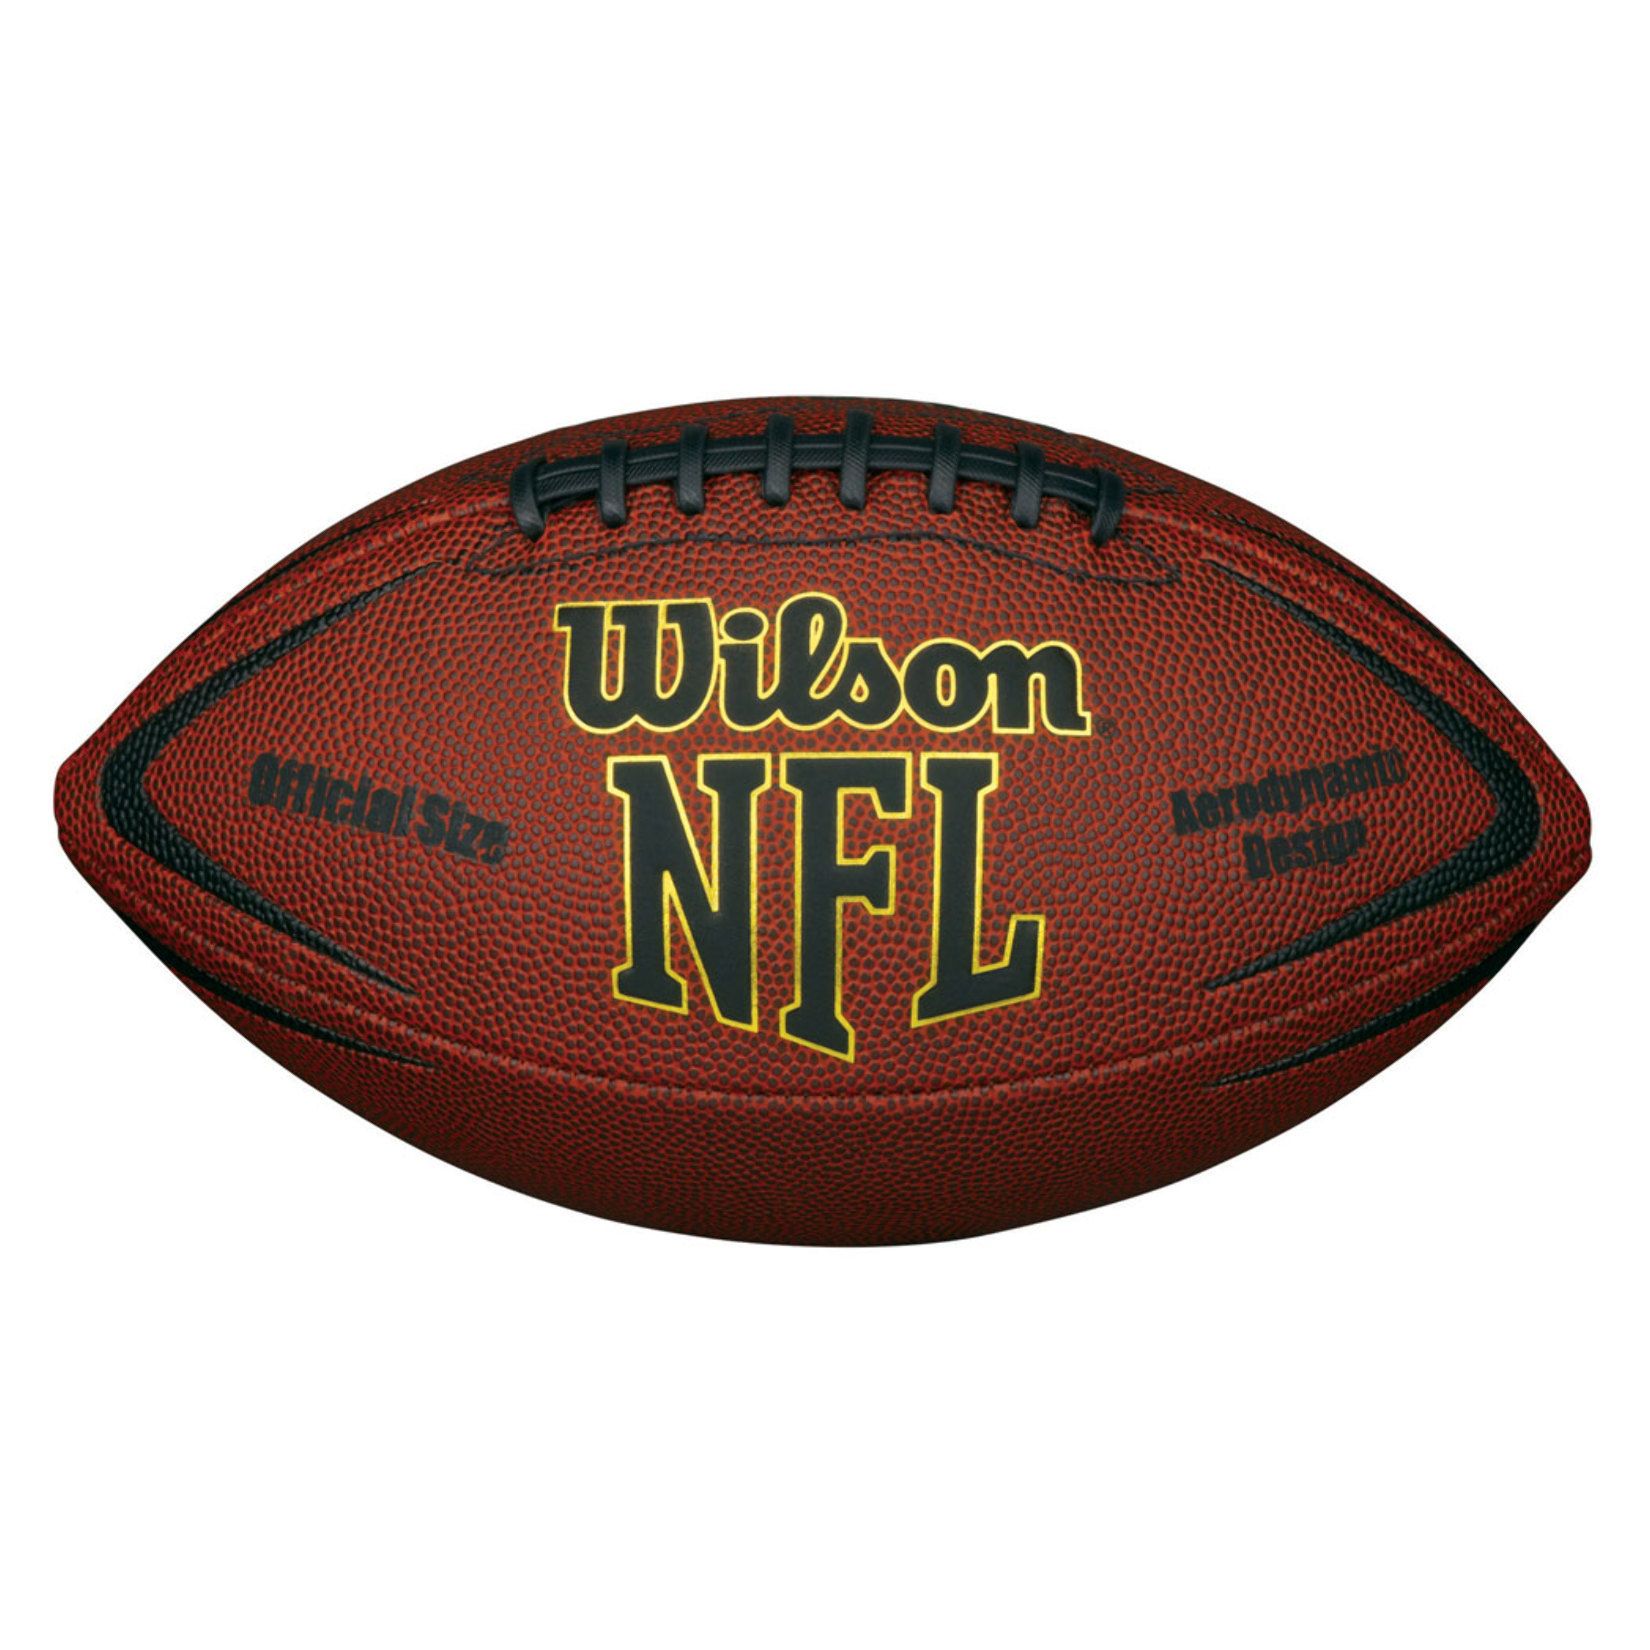 what is the official football of the nfl